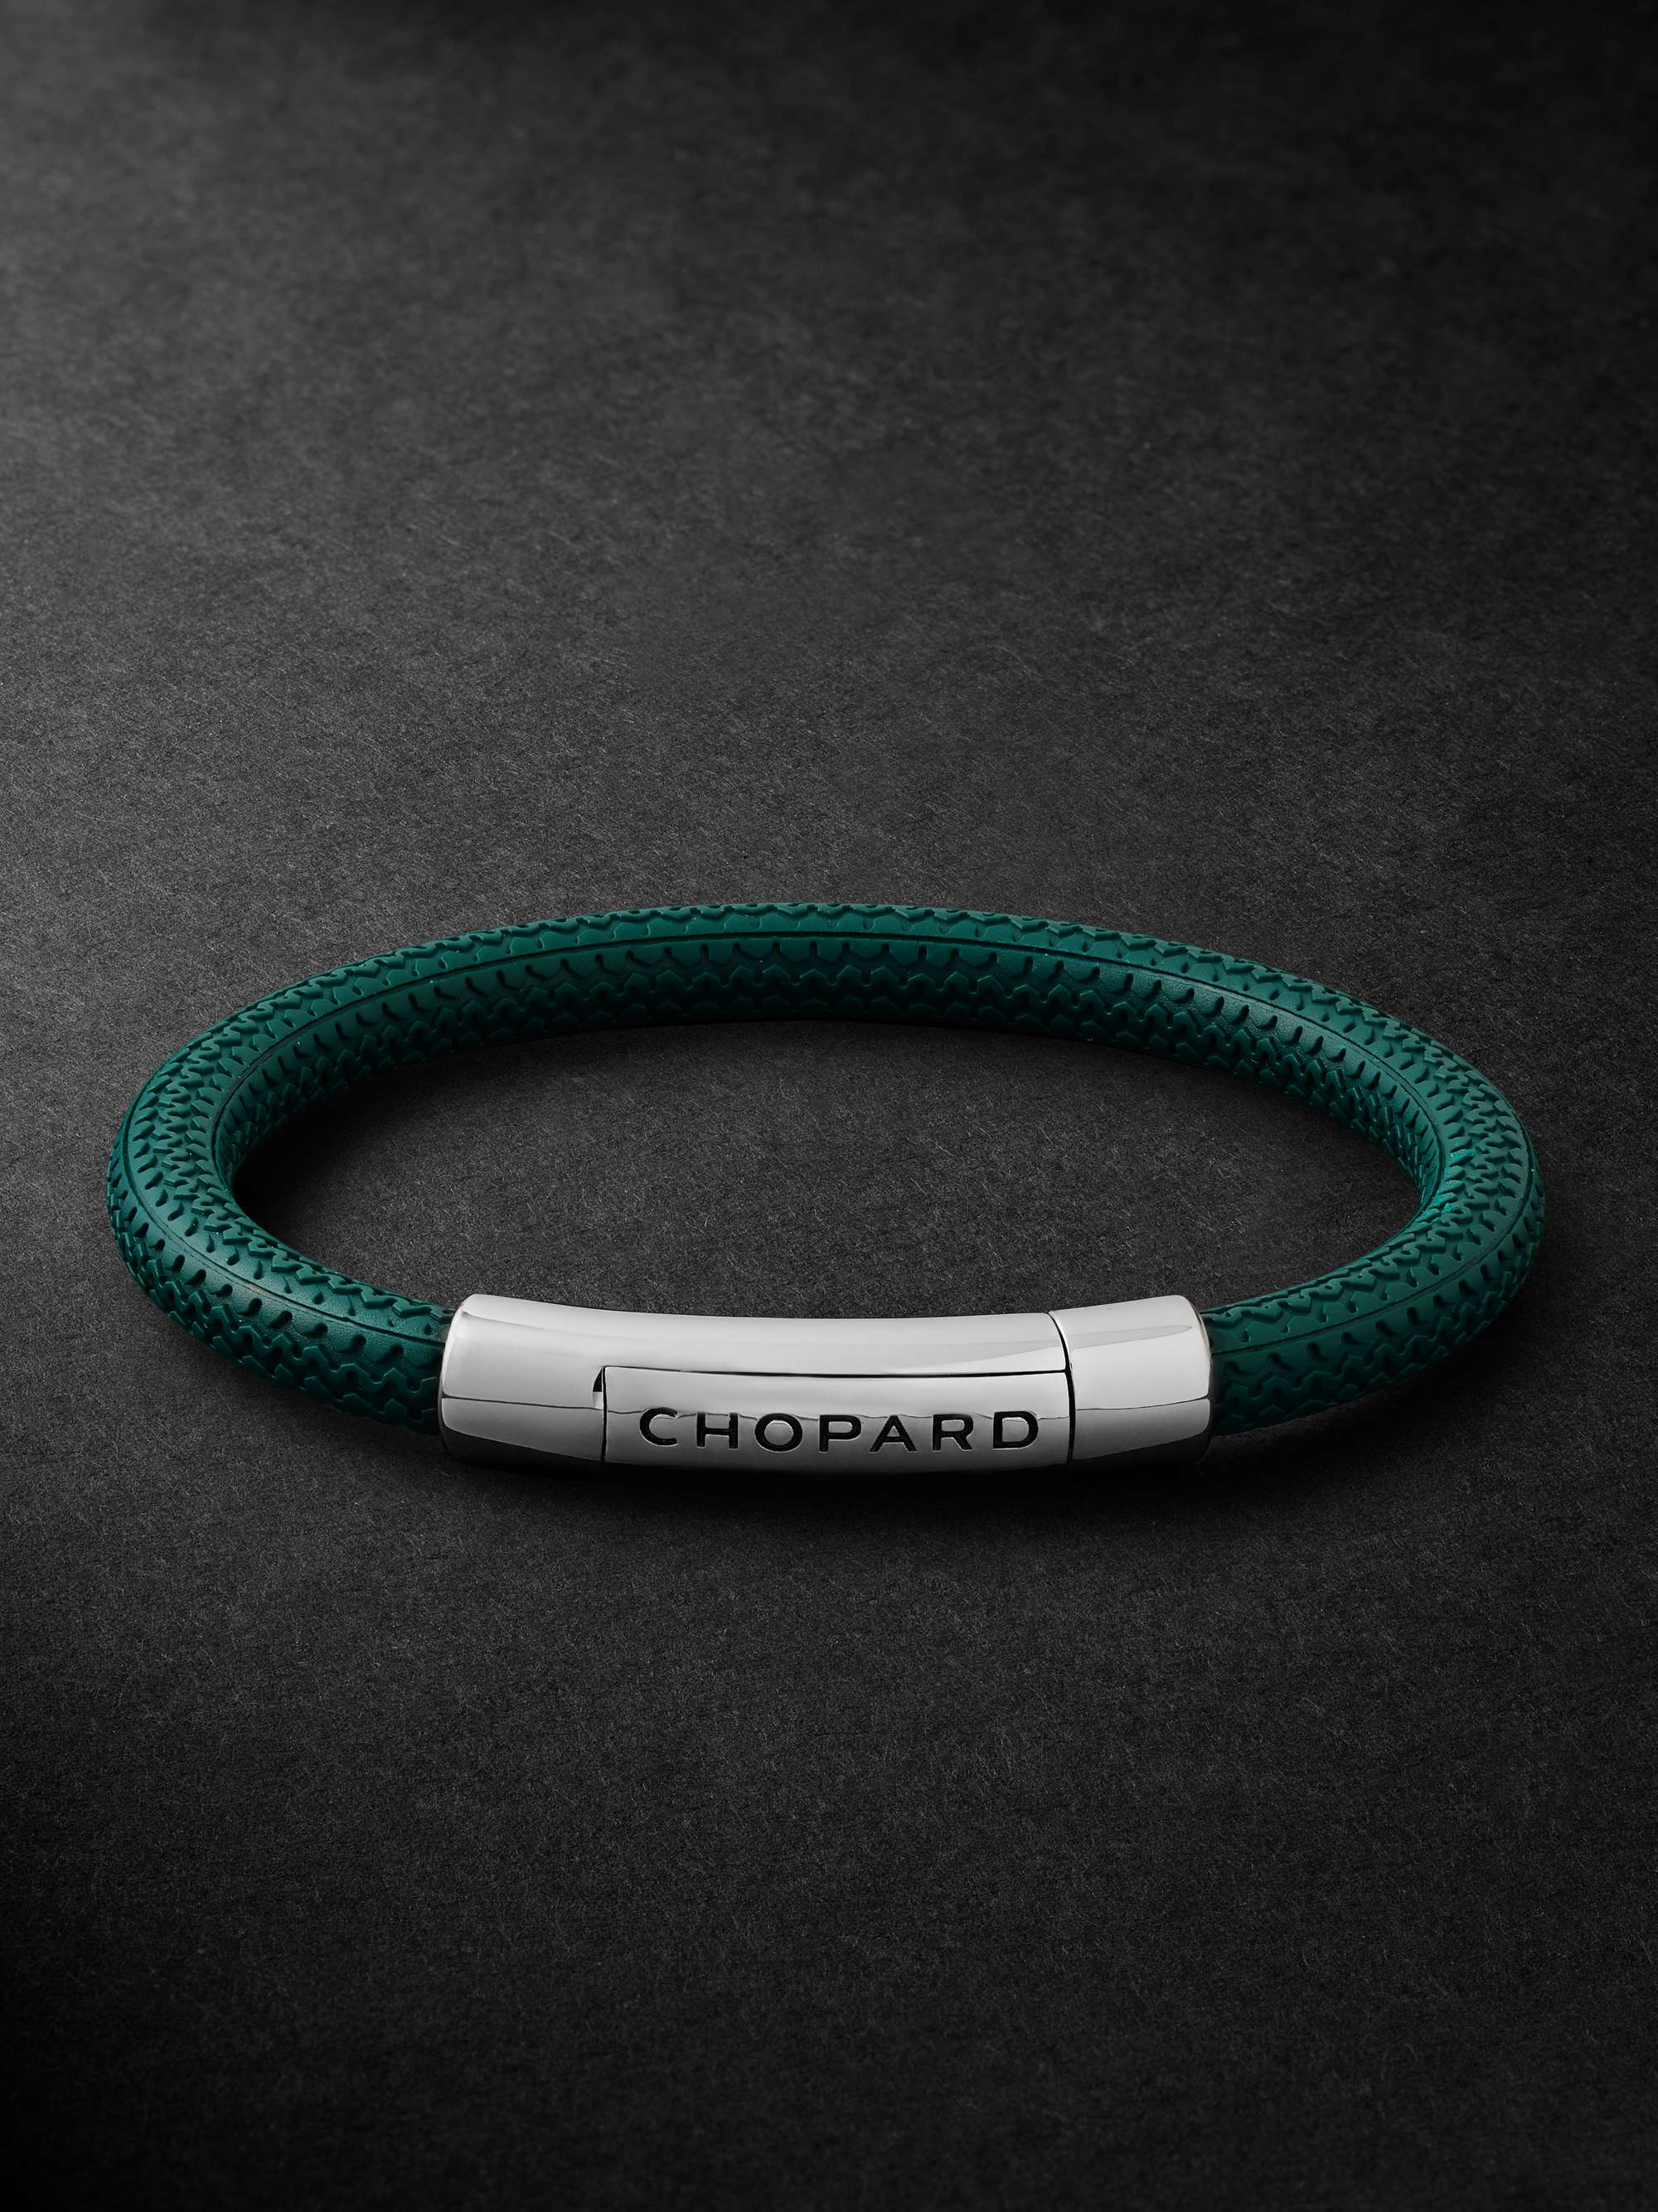 CHOPARD Classic Racing Rubber and Silver-Tone Bracelet | MR PORTER